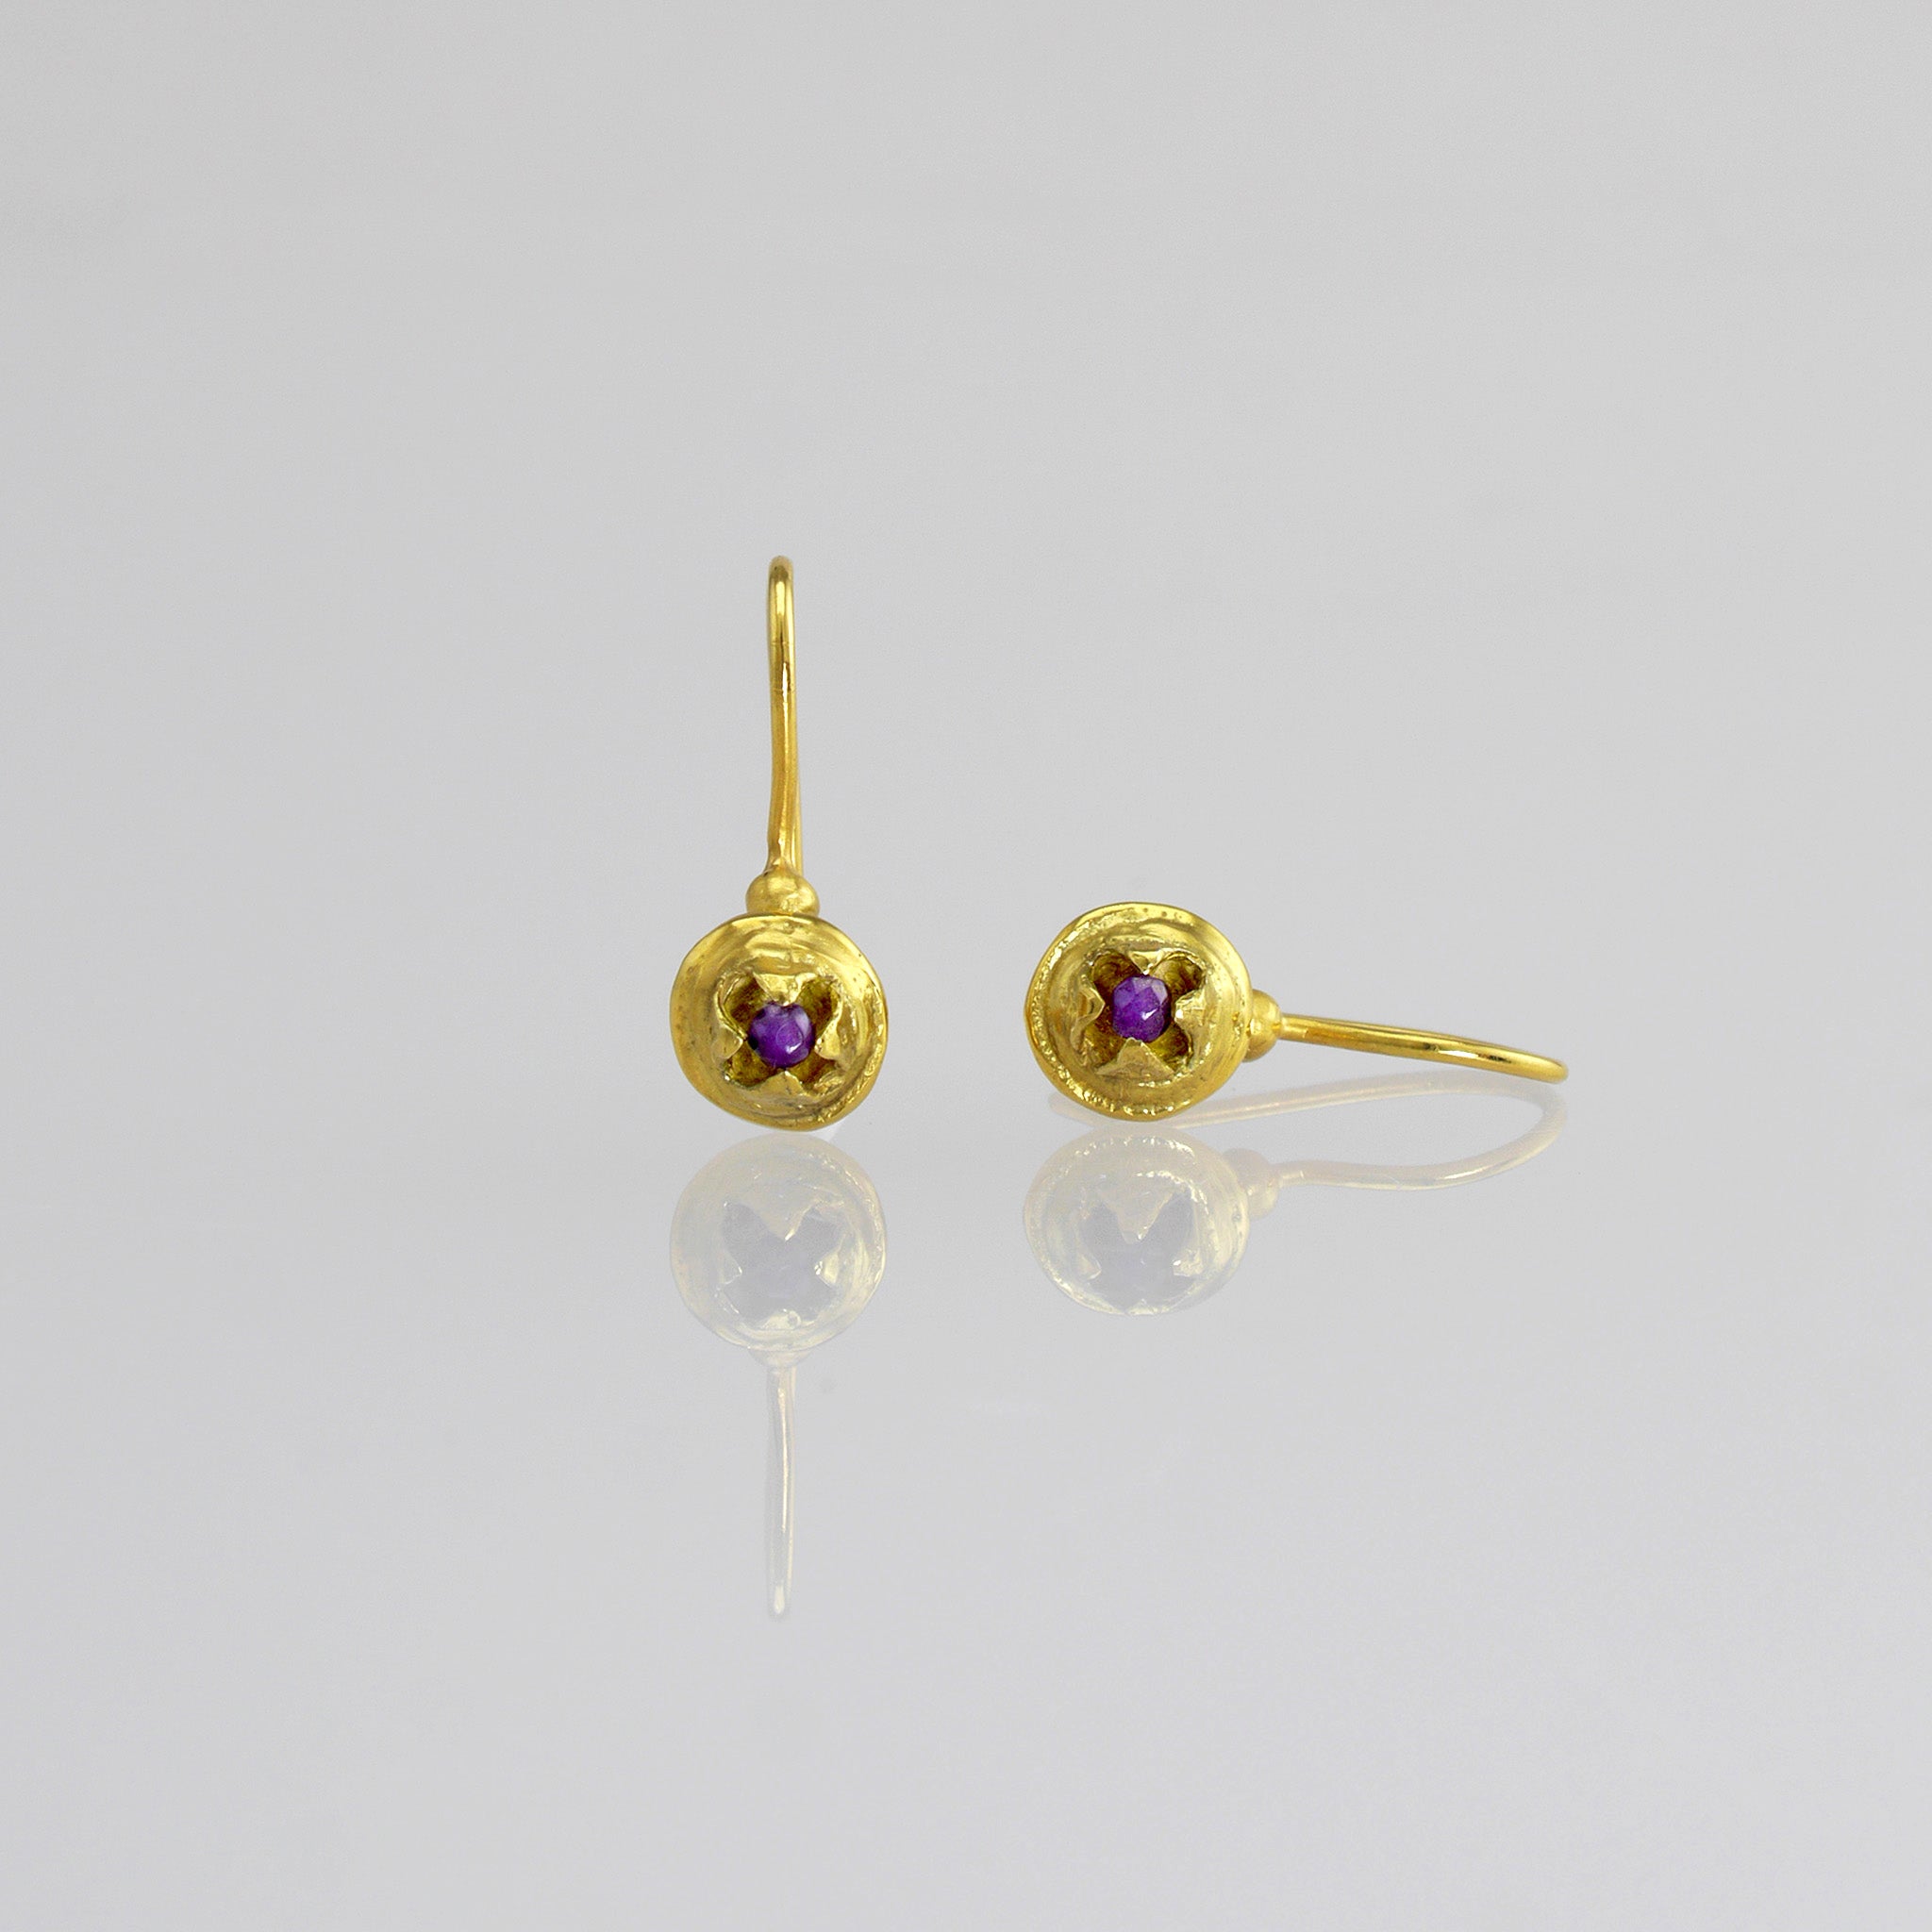 Delicate drop earrings in yellow gold, inspired by eucalyptus seeds, featuring a central inlaid amethyst stone symbolizing a seed ready to hatch.